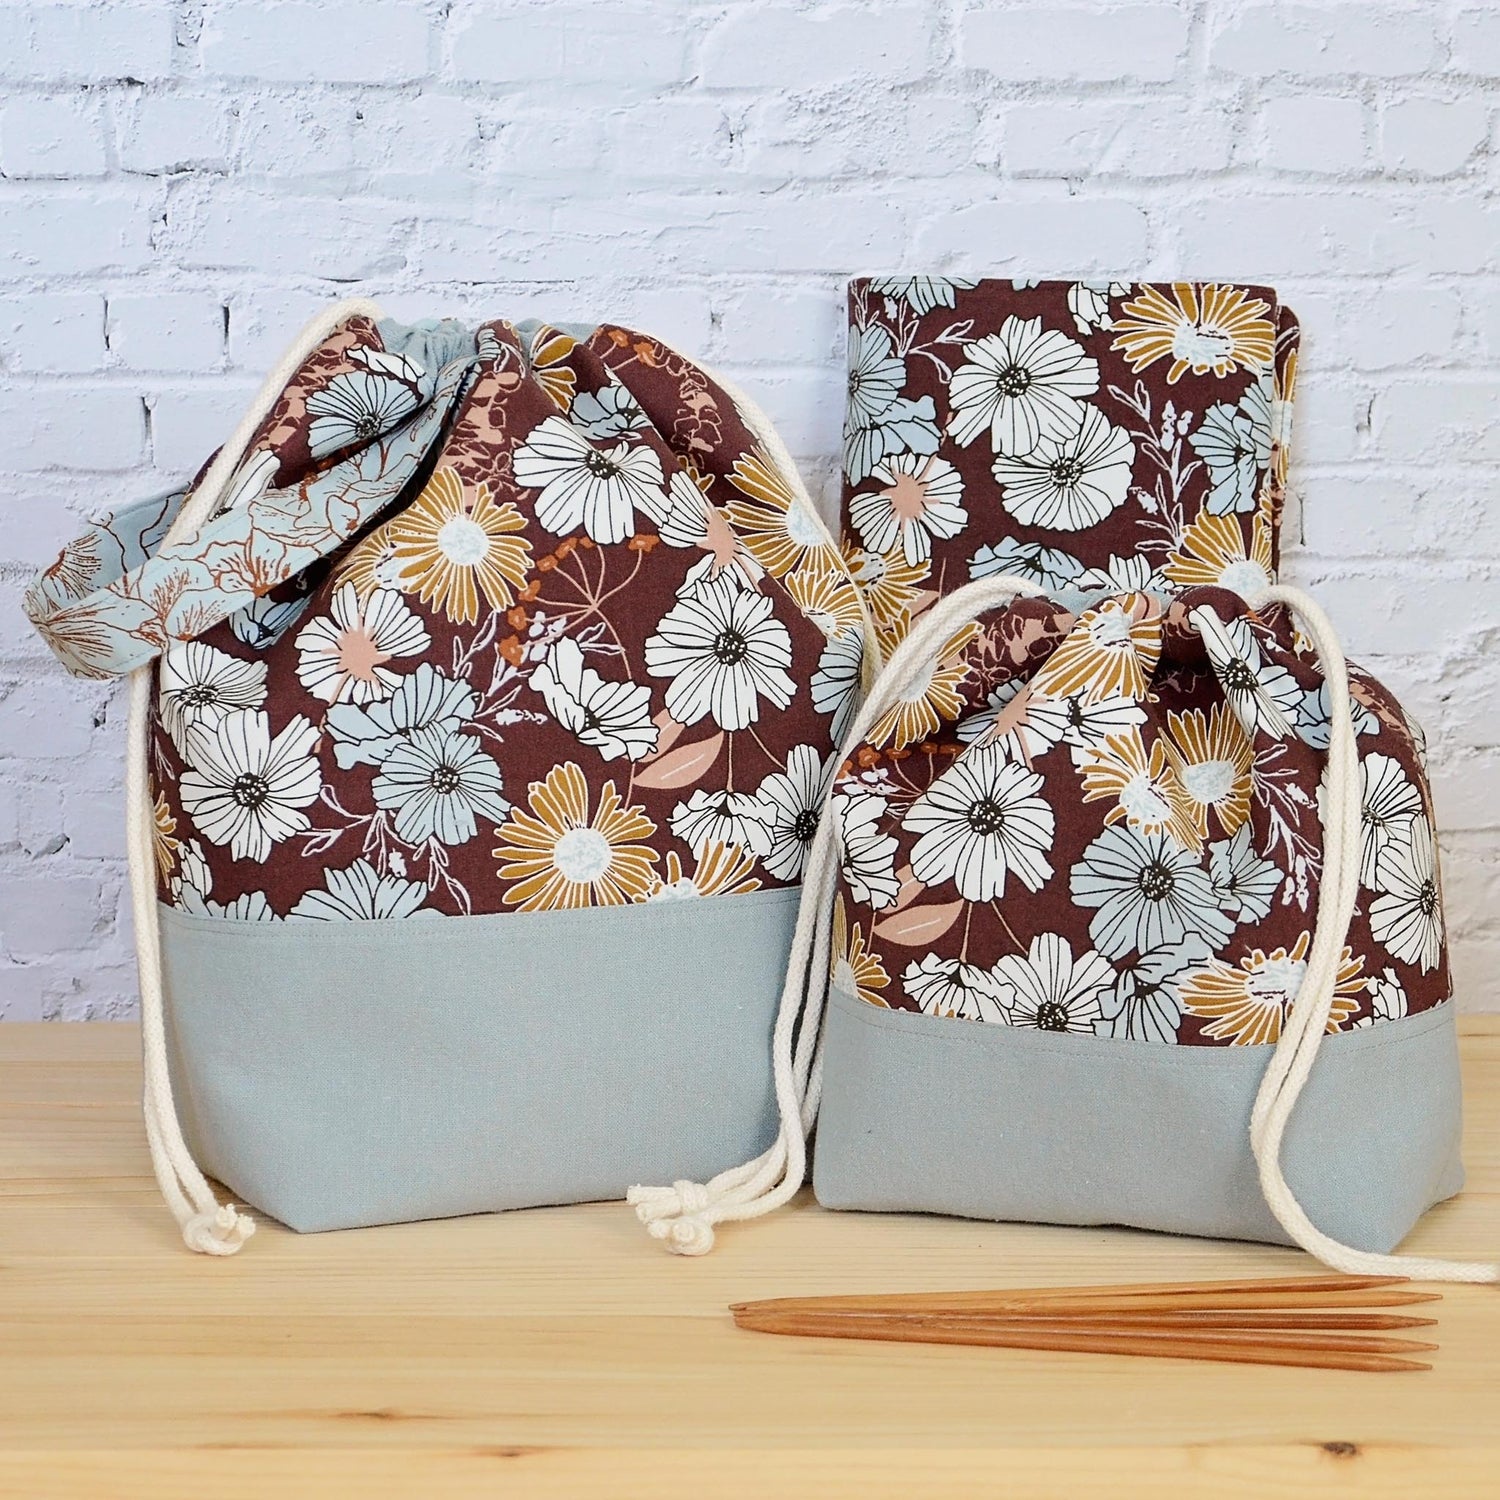 Knitting bag and needle wrap collection in beautiful florals.  Made in Nova Scotia, Canada.